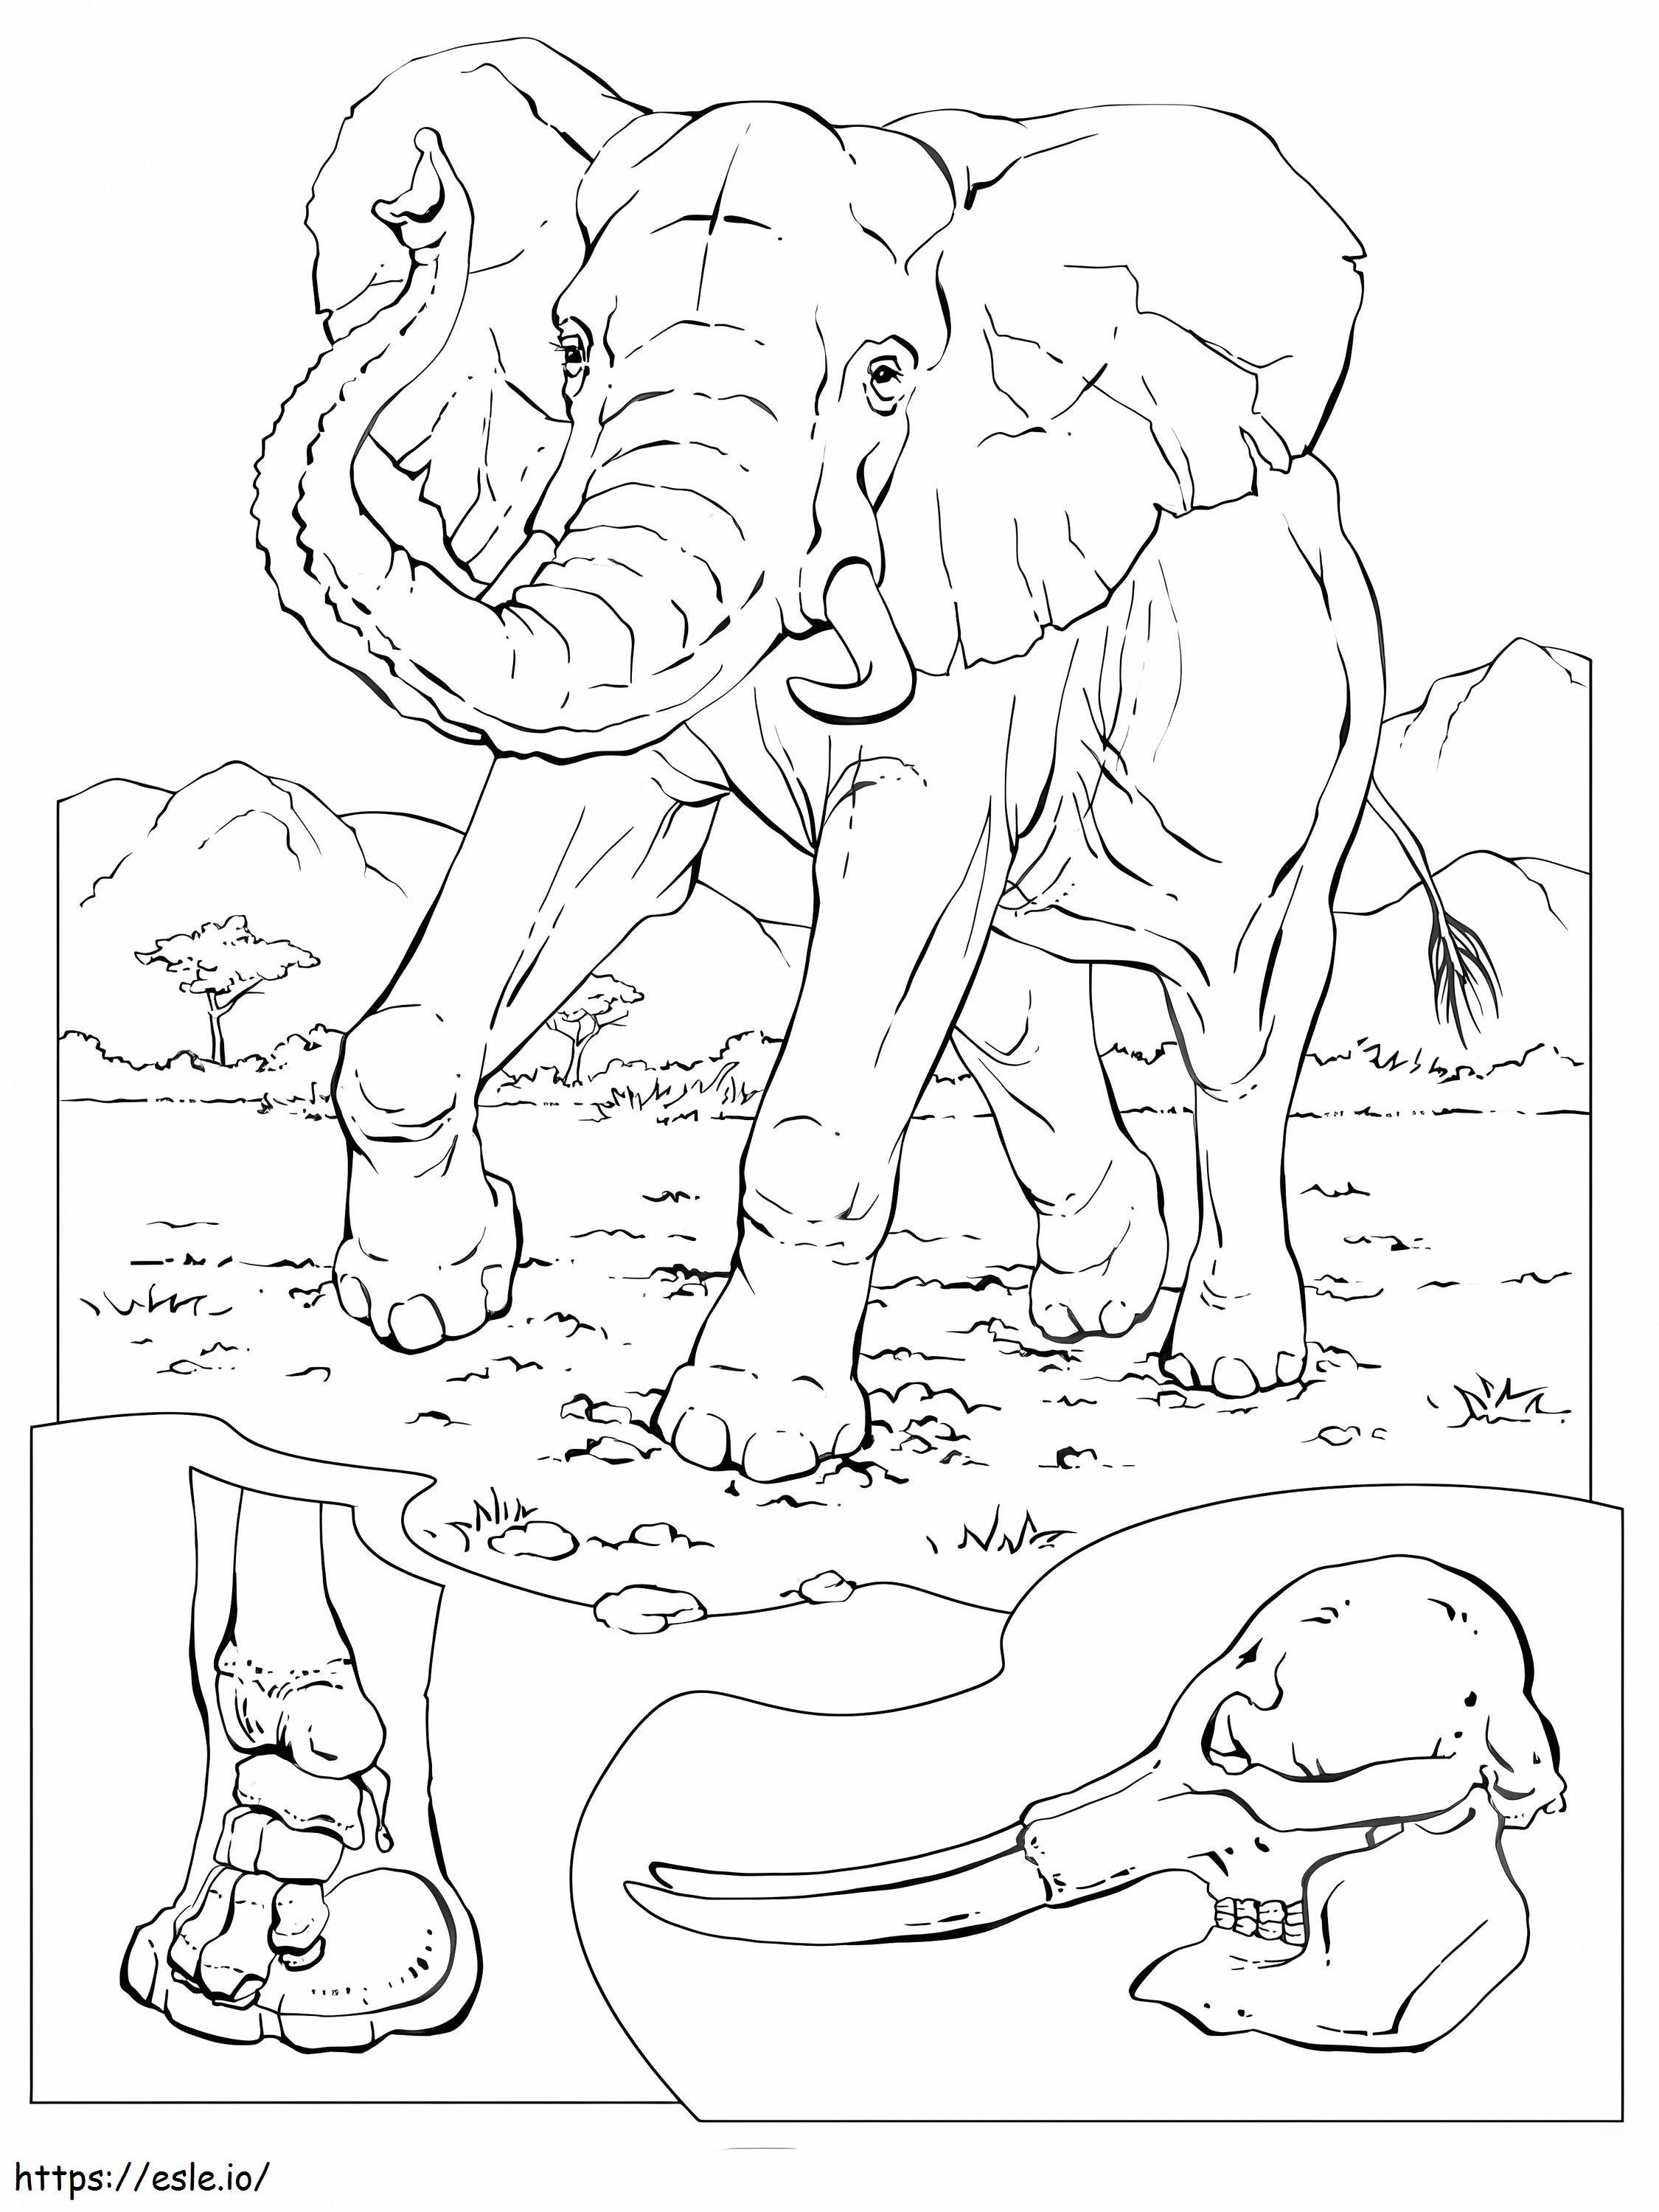 Elephant 6 coloring page